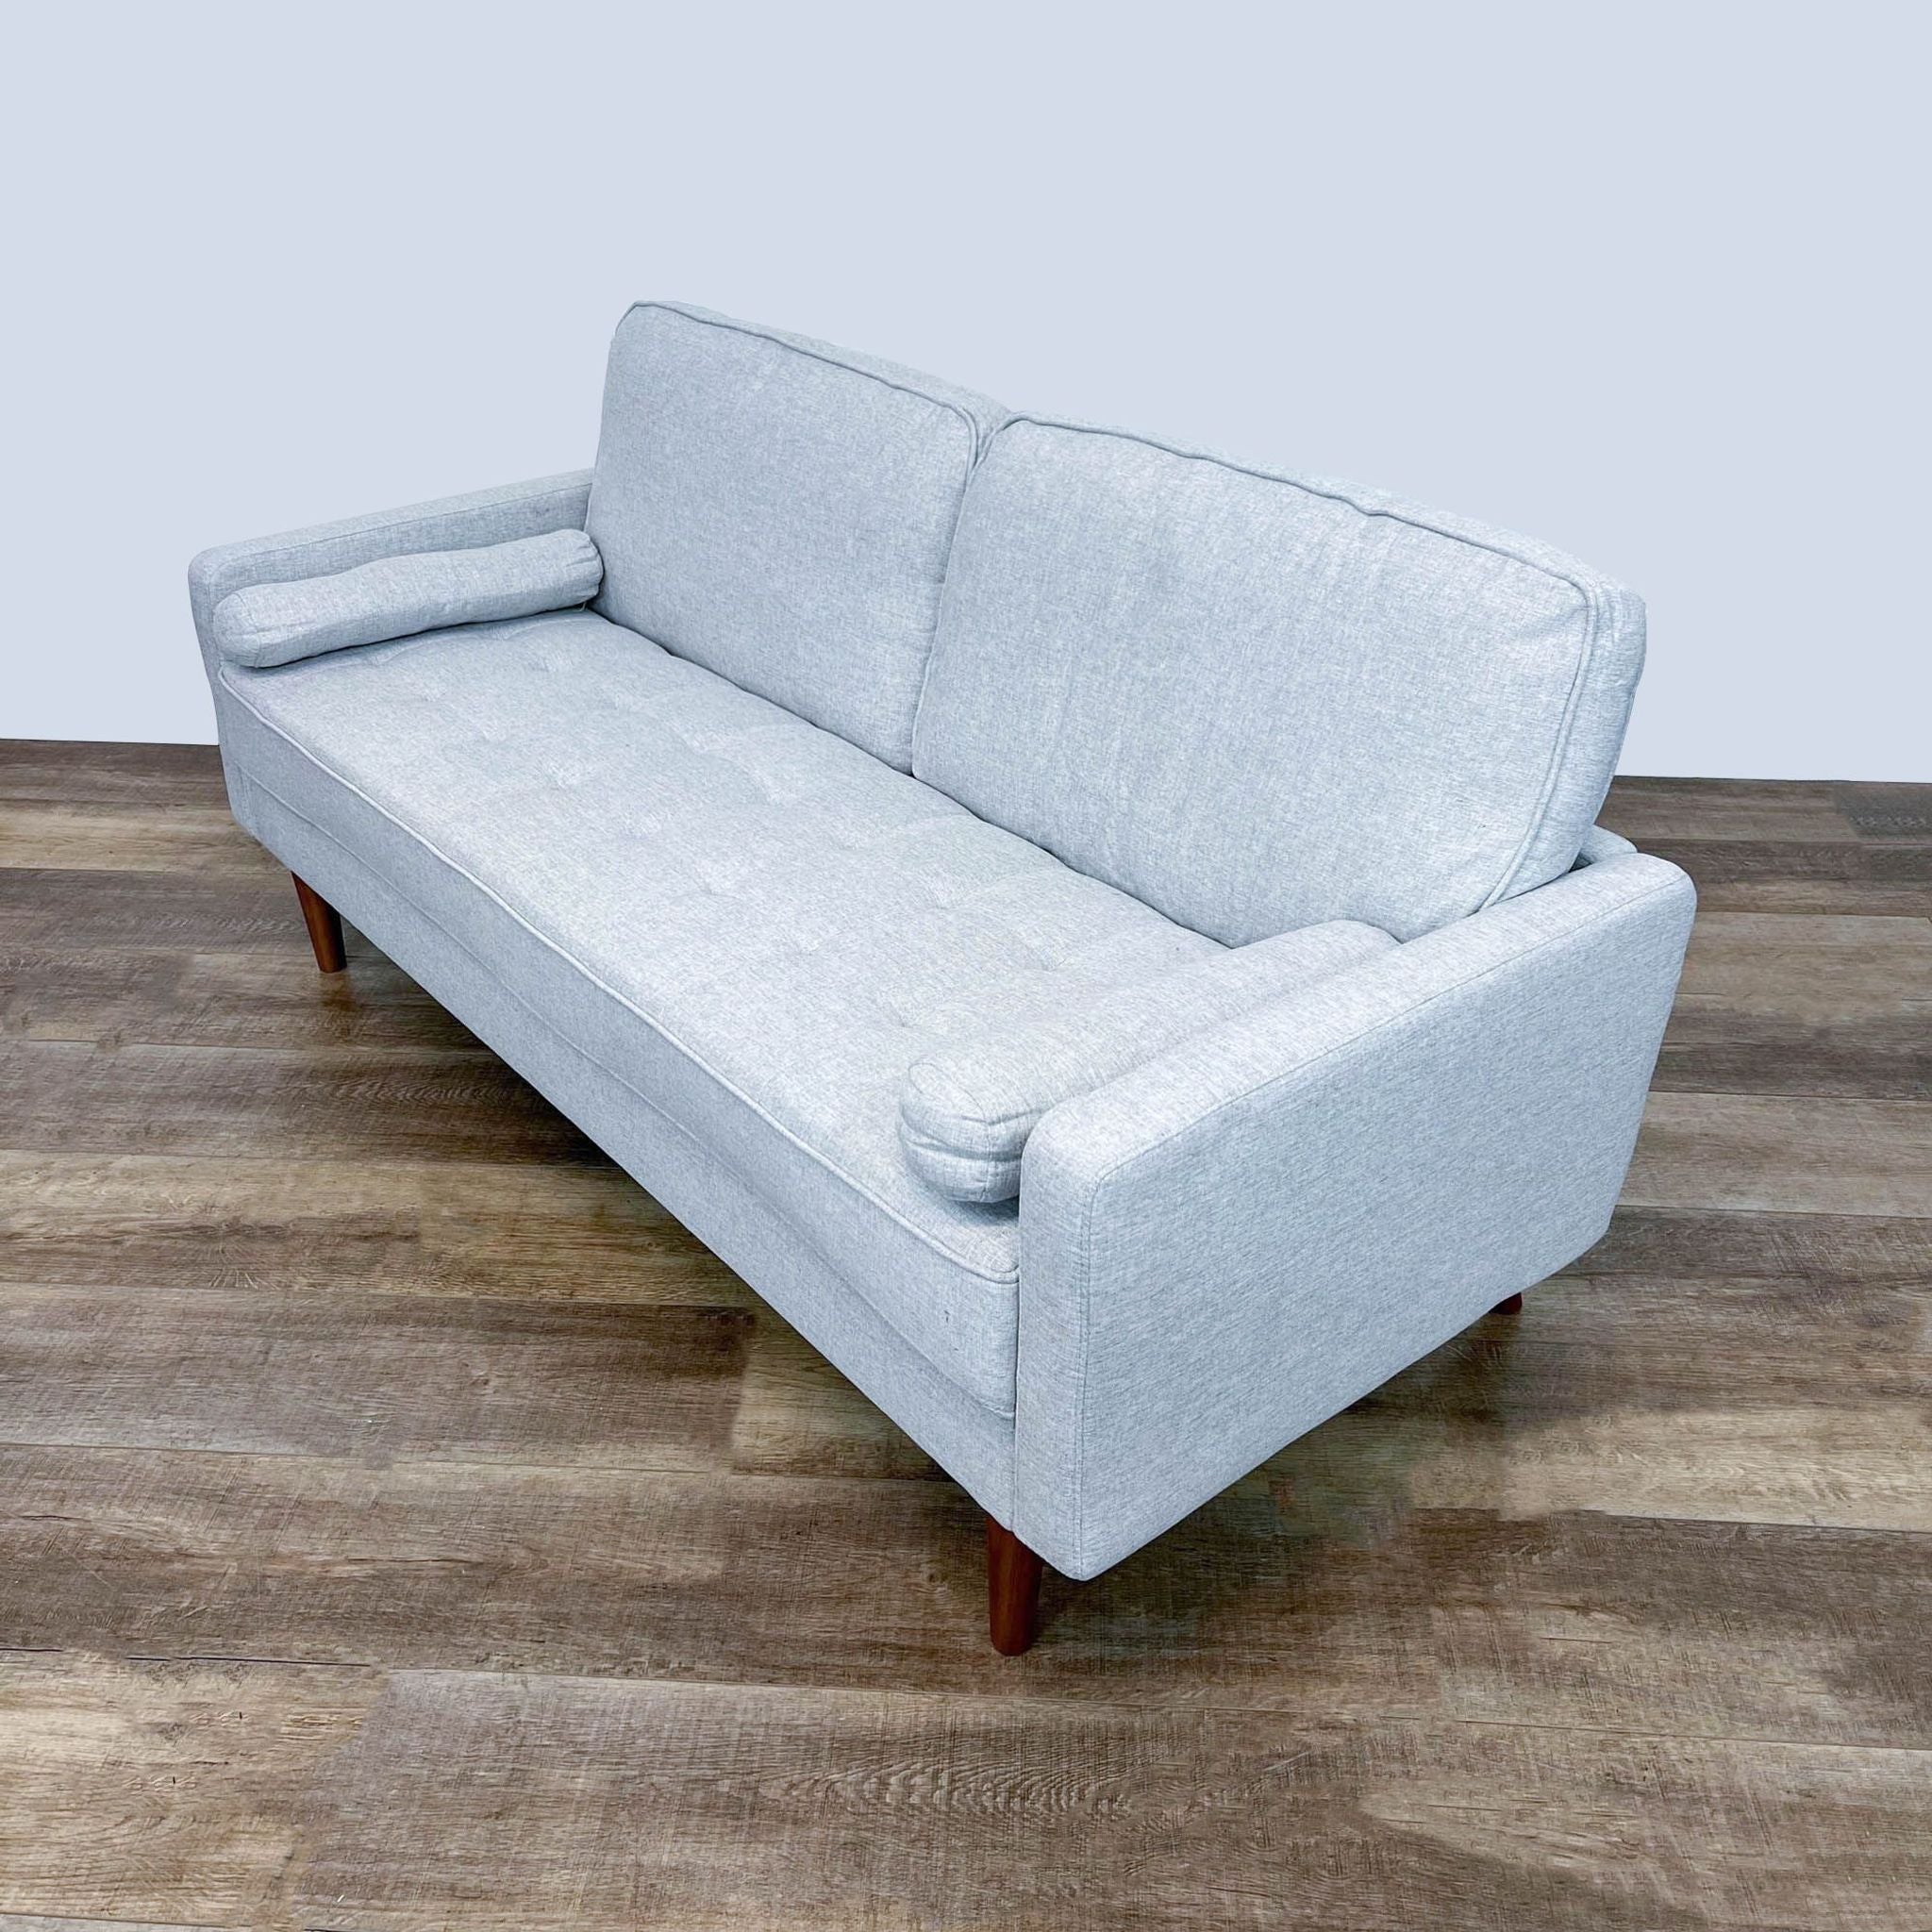 Frontal view of a narrow arm Reperch loveseat with wood finish feet and bolster cushions on a wooden floor.